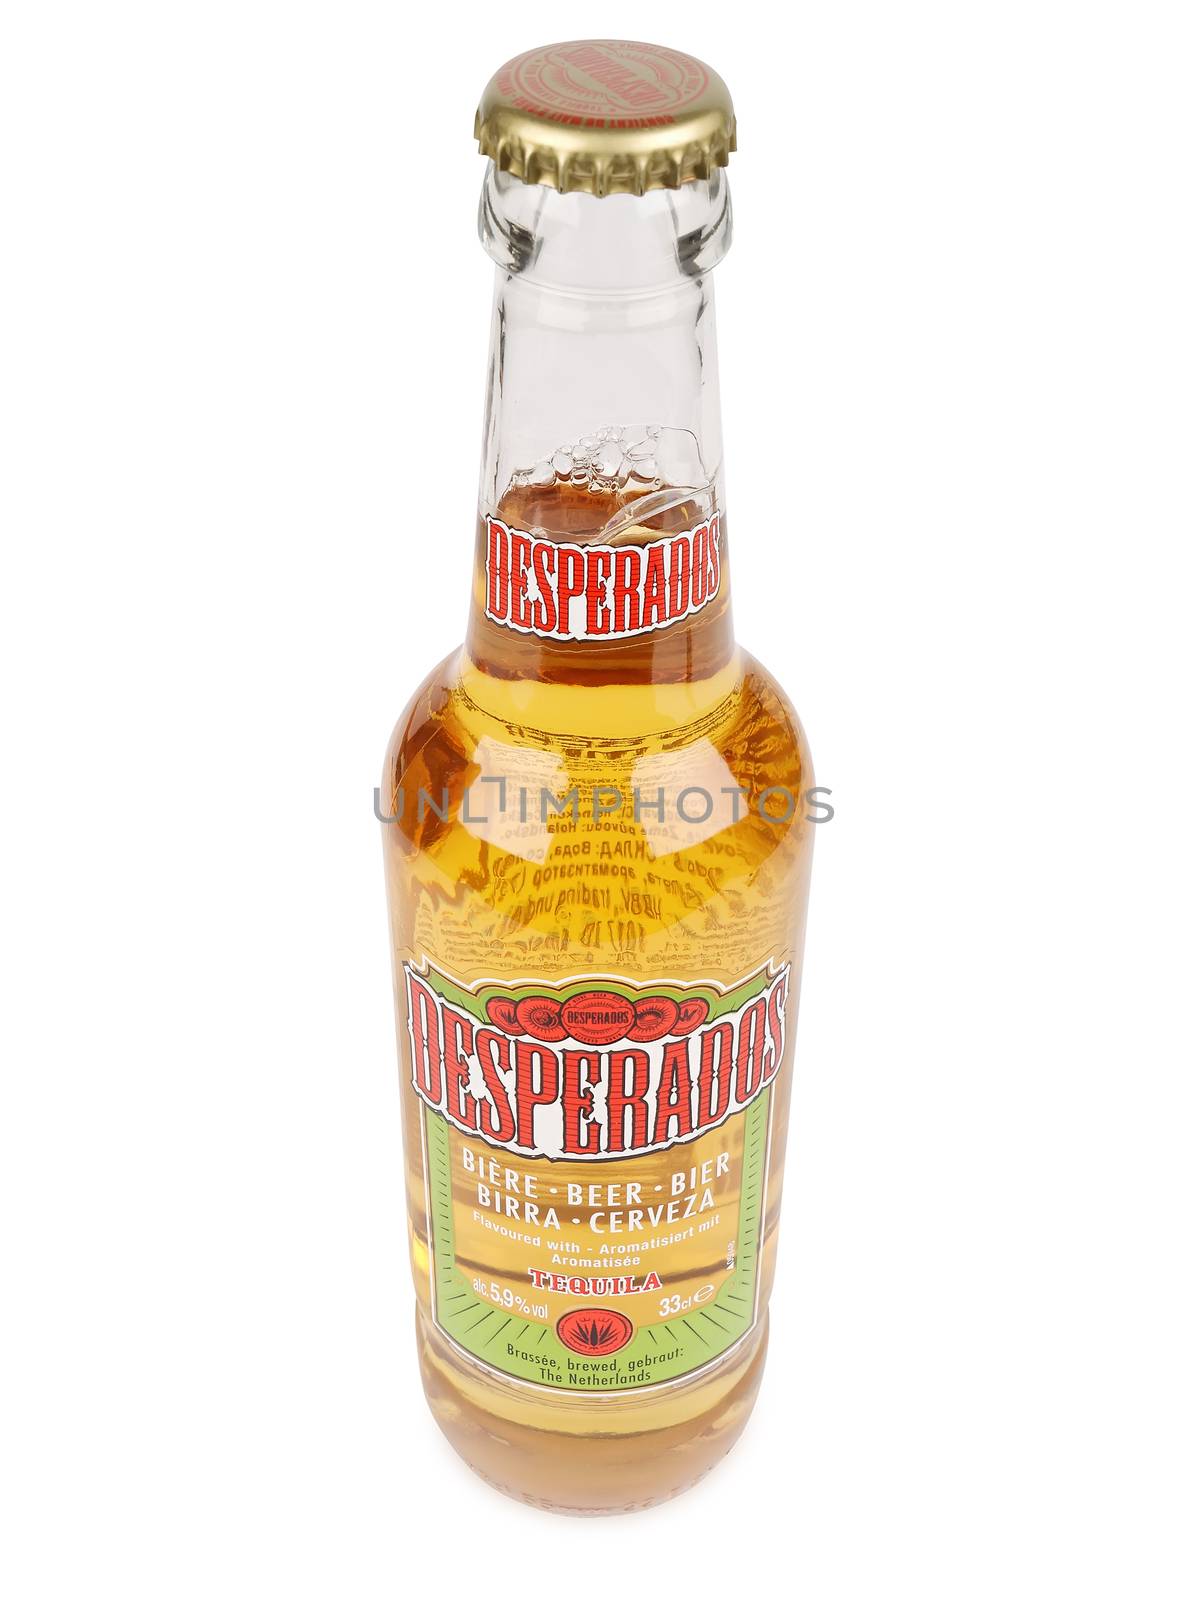 PULA, CROATIA - FEBRUARY 27, 2016: Desperados, lager flavored with tequila is a popular beer produced by Heineken and sold in over 50 countries.